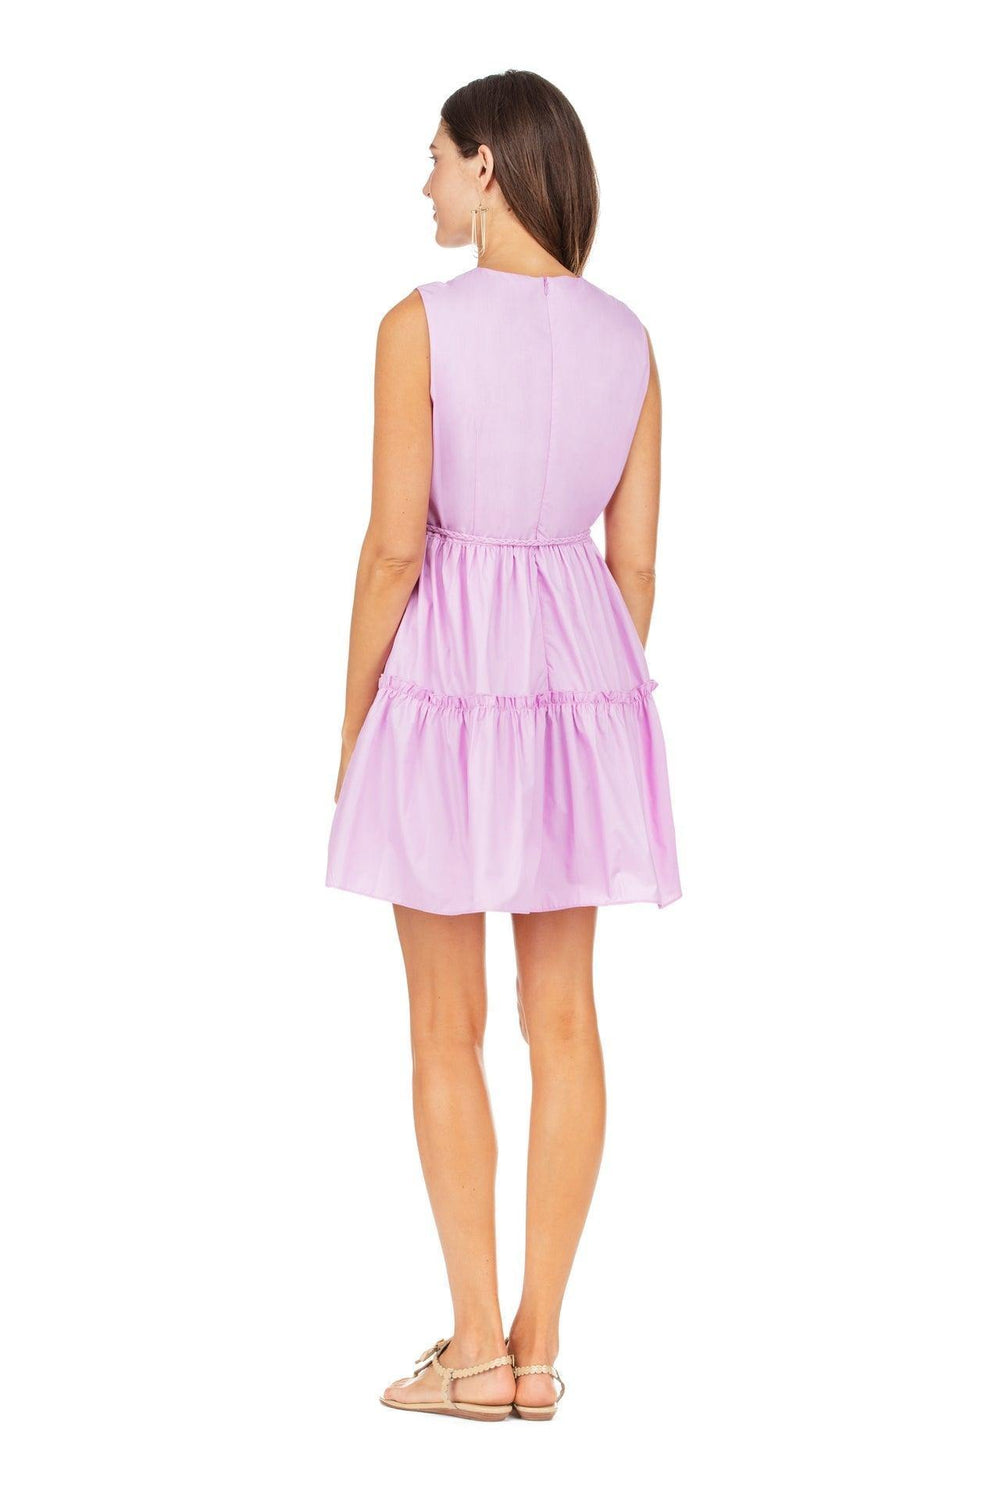 cute easter dressed online young women houston tre chic